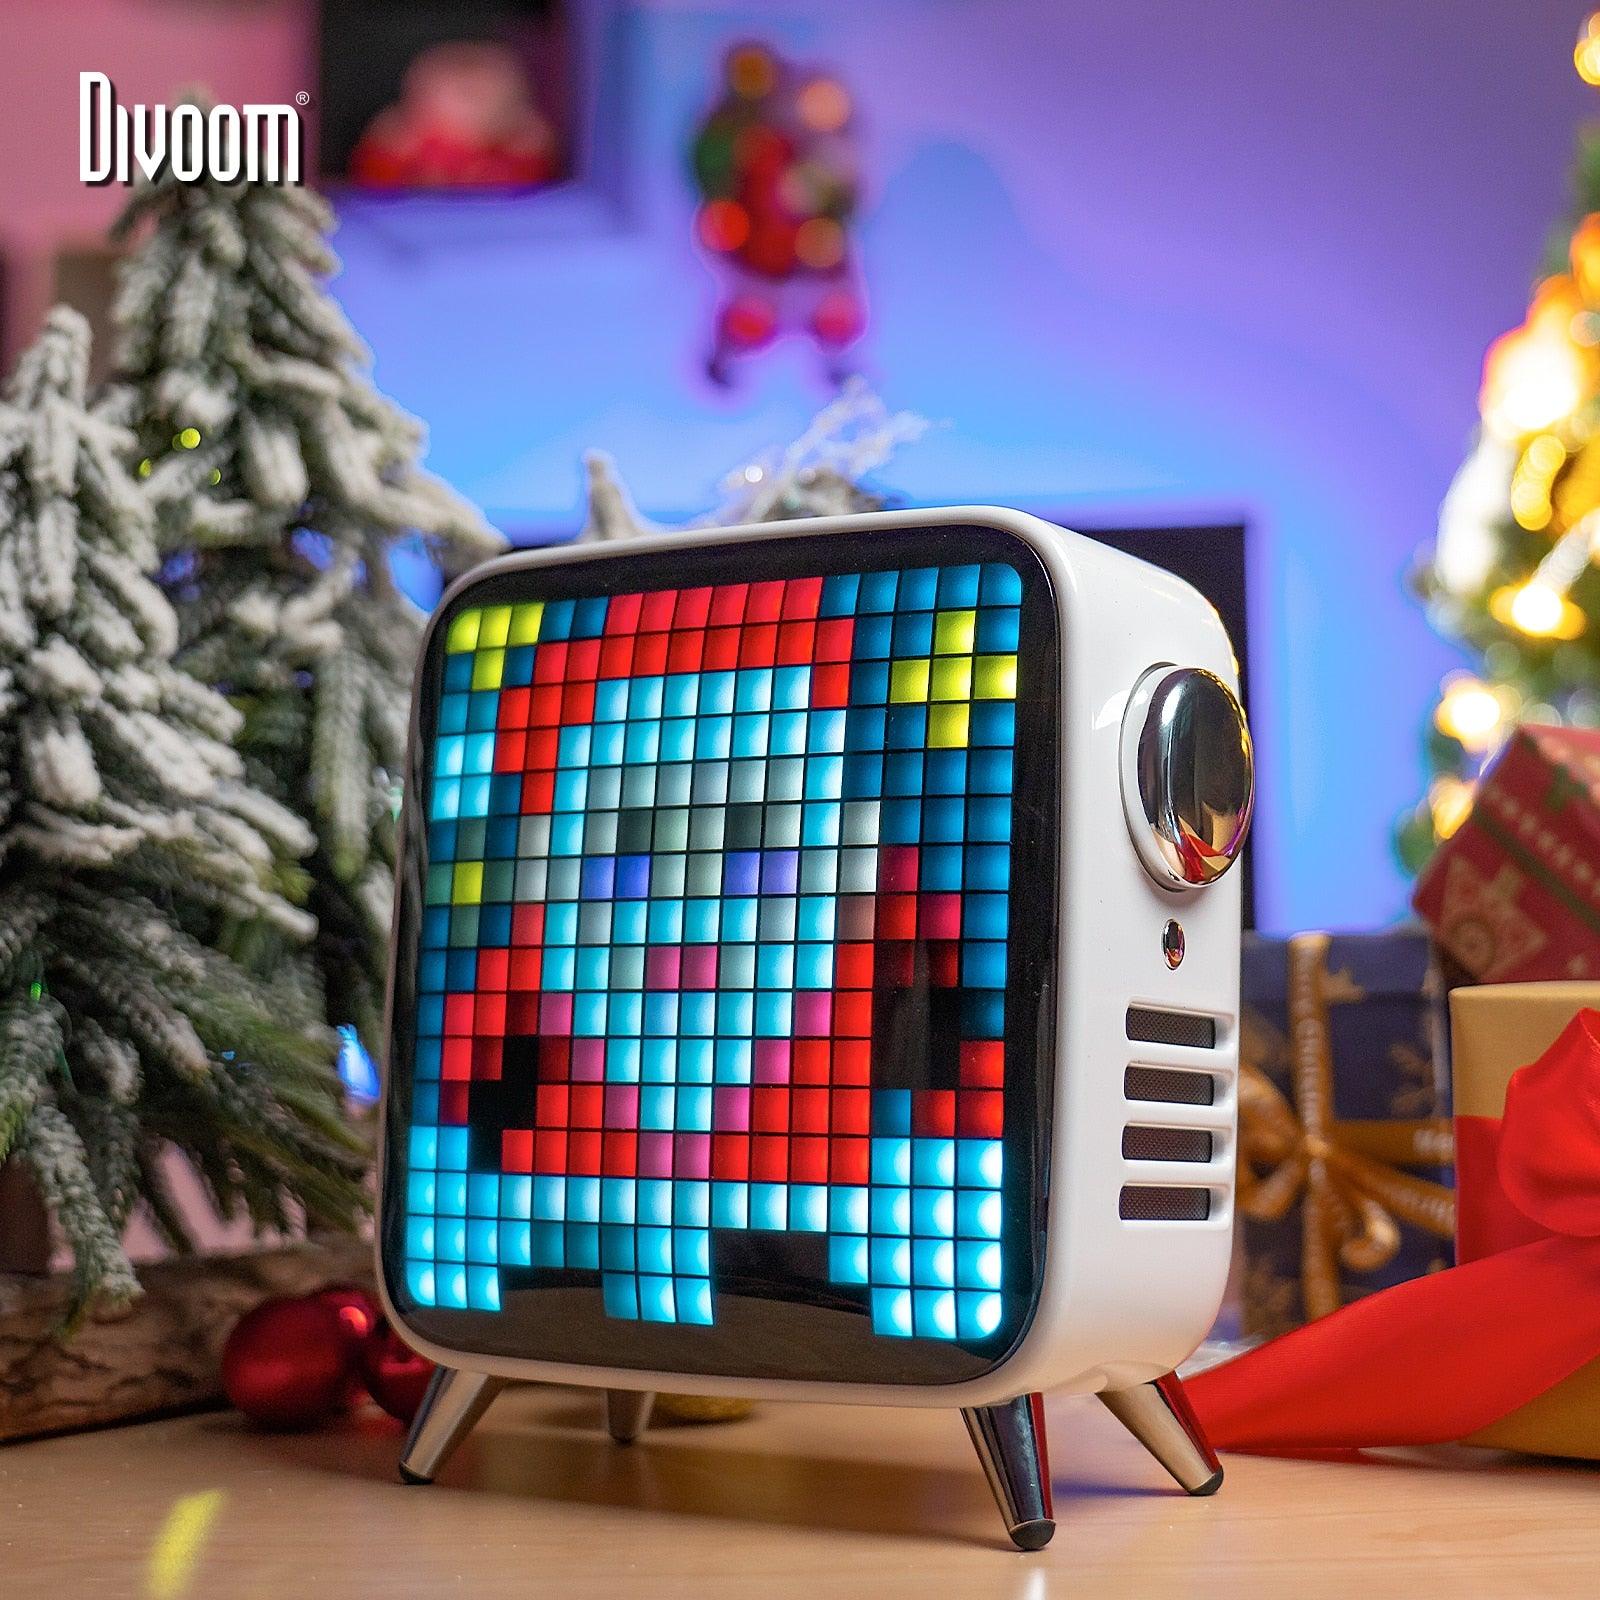 Divoom Tivoo Max Pixel Art Audio System - High-Quality Audio with Creative Decor